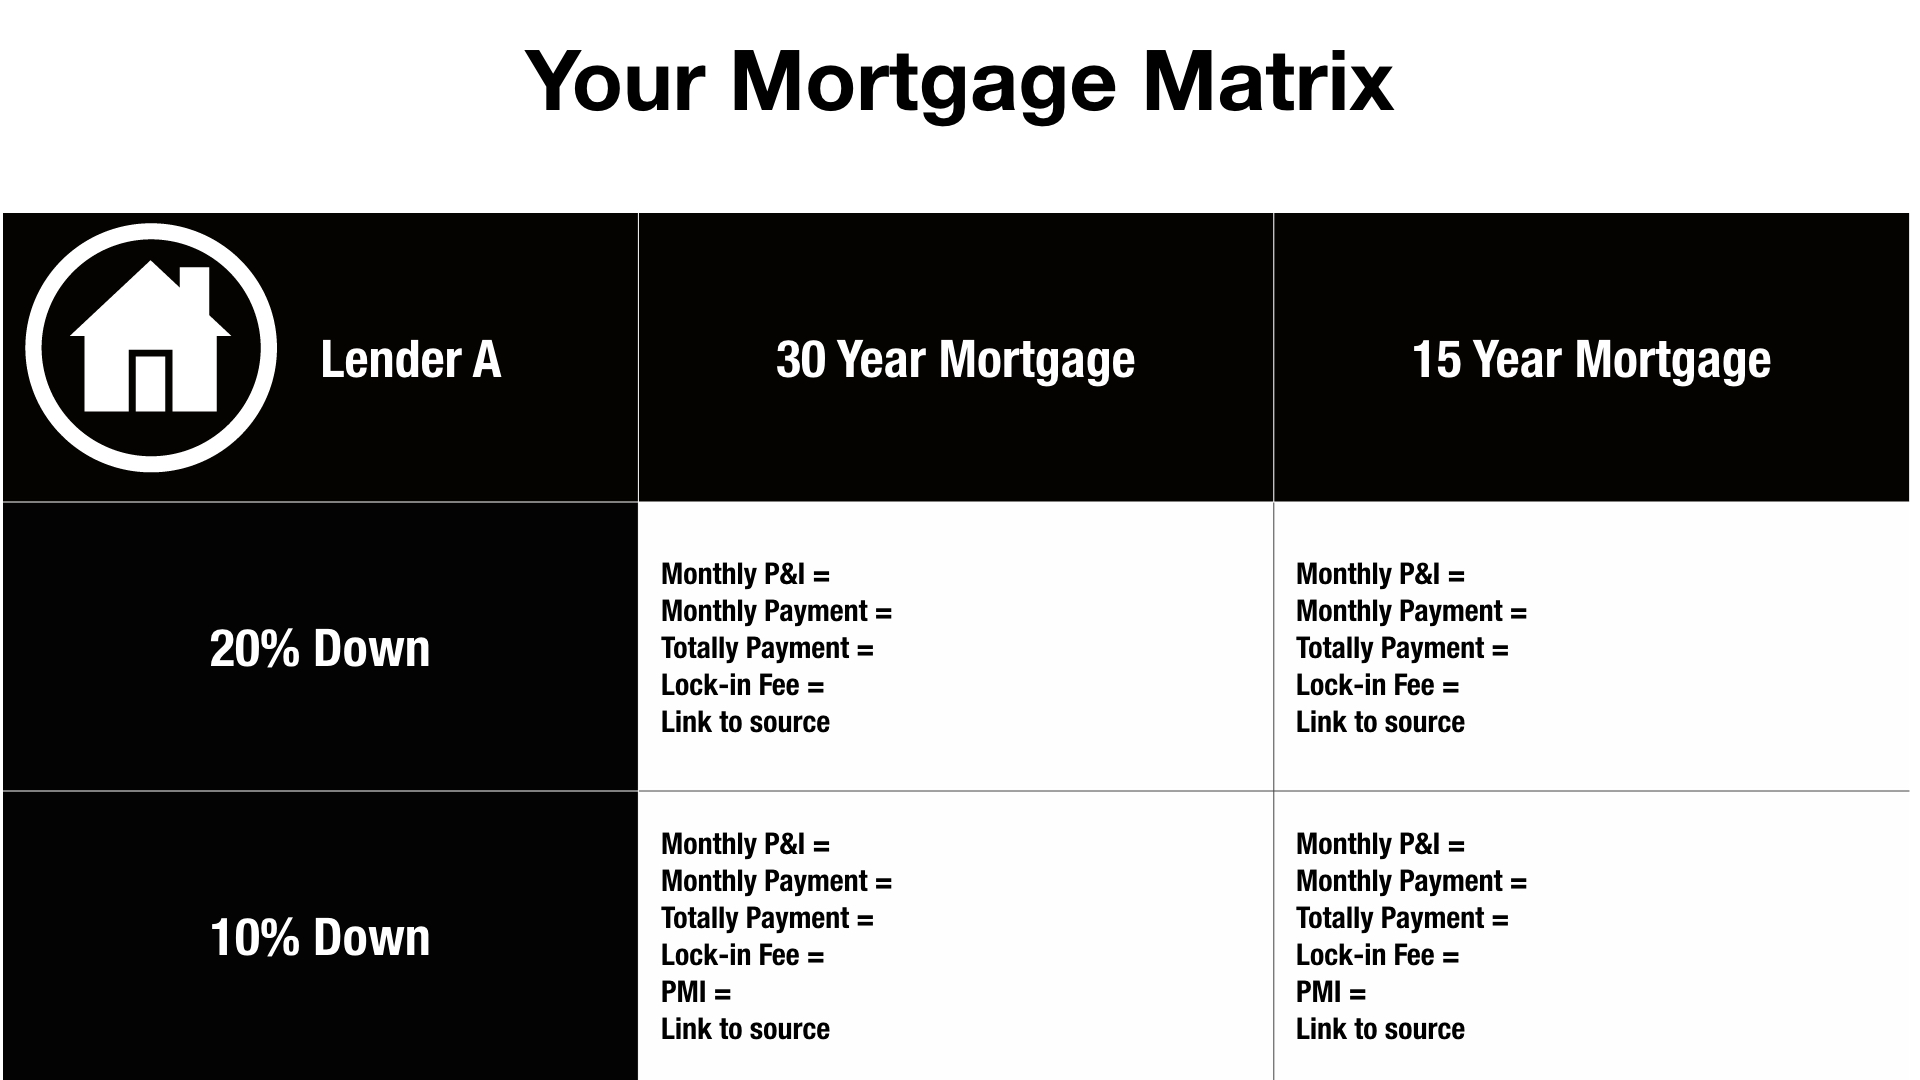 The 6 Things I Wish I Knew Before Buying a House - Your Mortgage Matrix